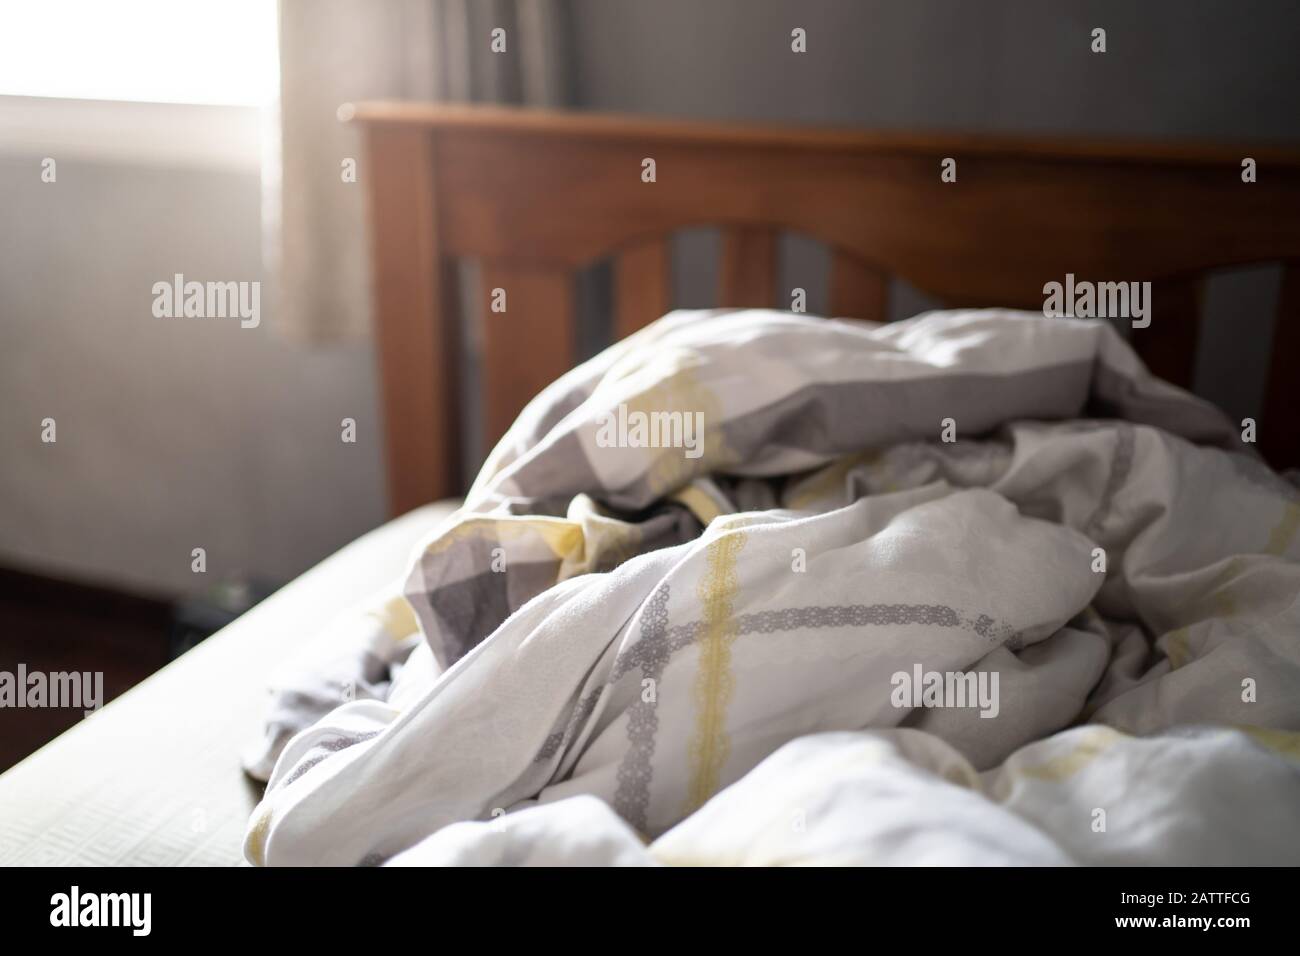 Messy duvet on a bed Stock Photo